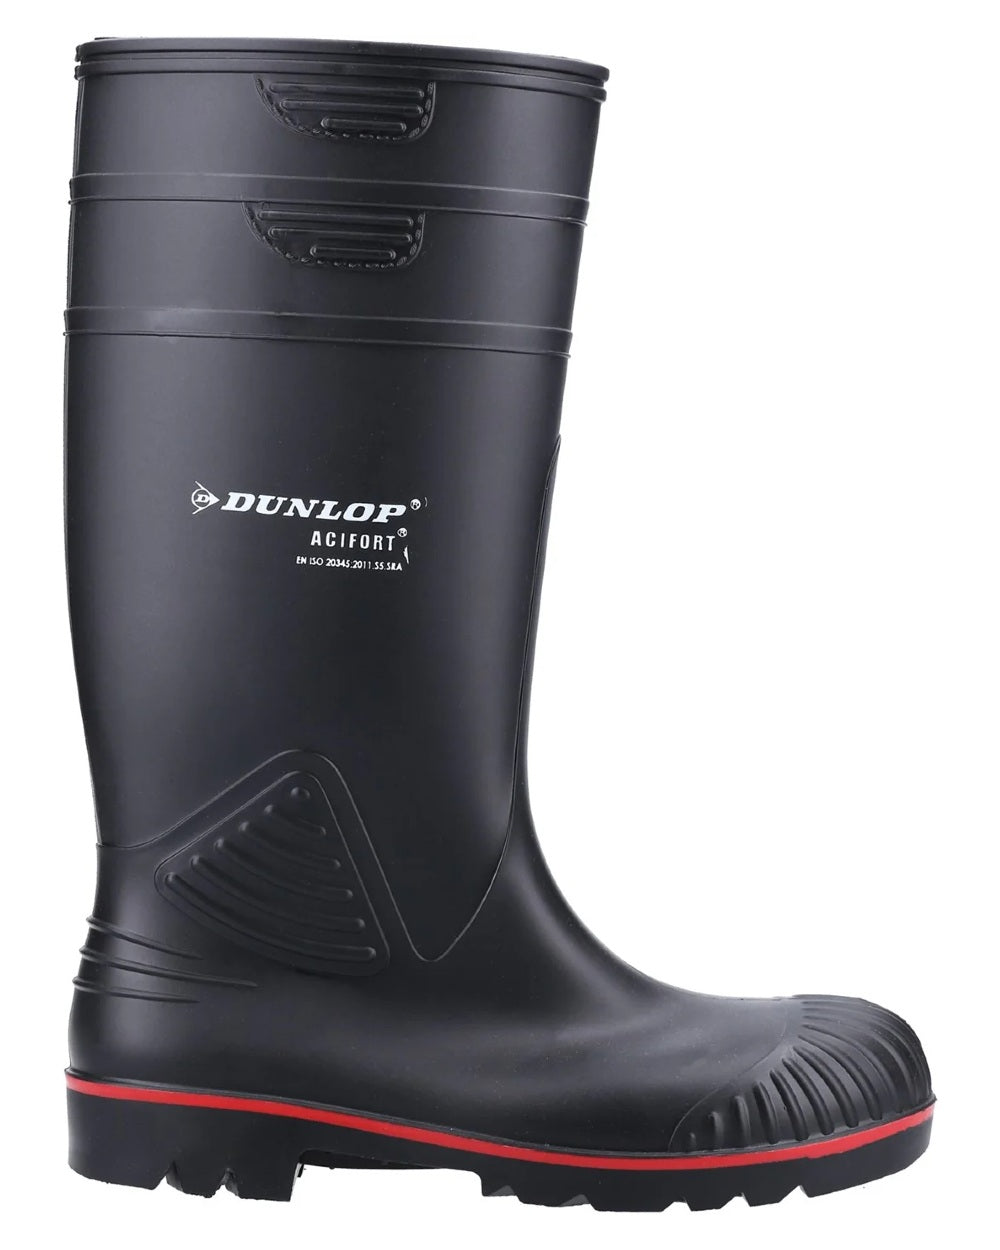 Black coloured Dunlop Acifort Heavy Duty Full Safety Wellingtons on white background 